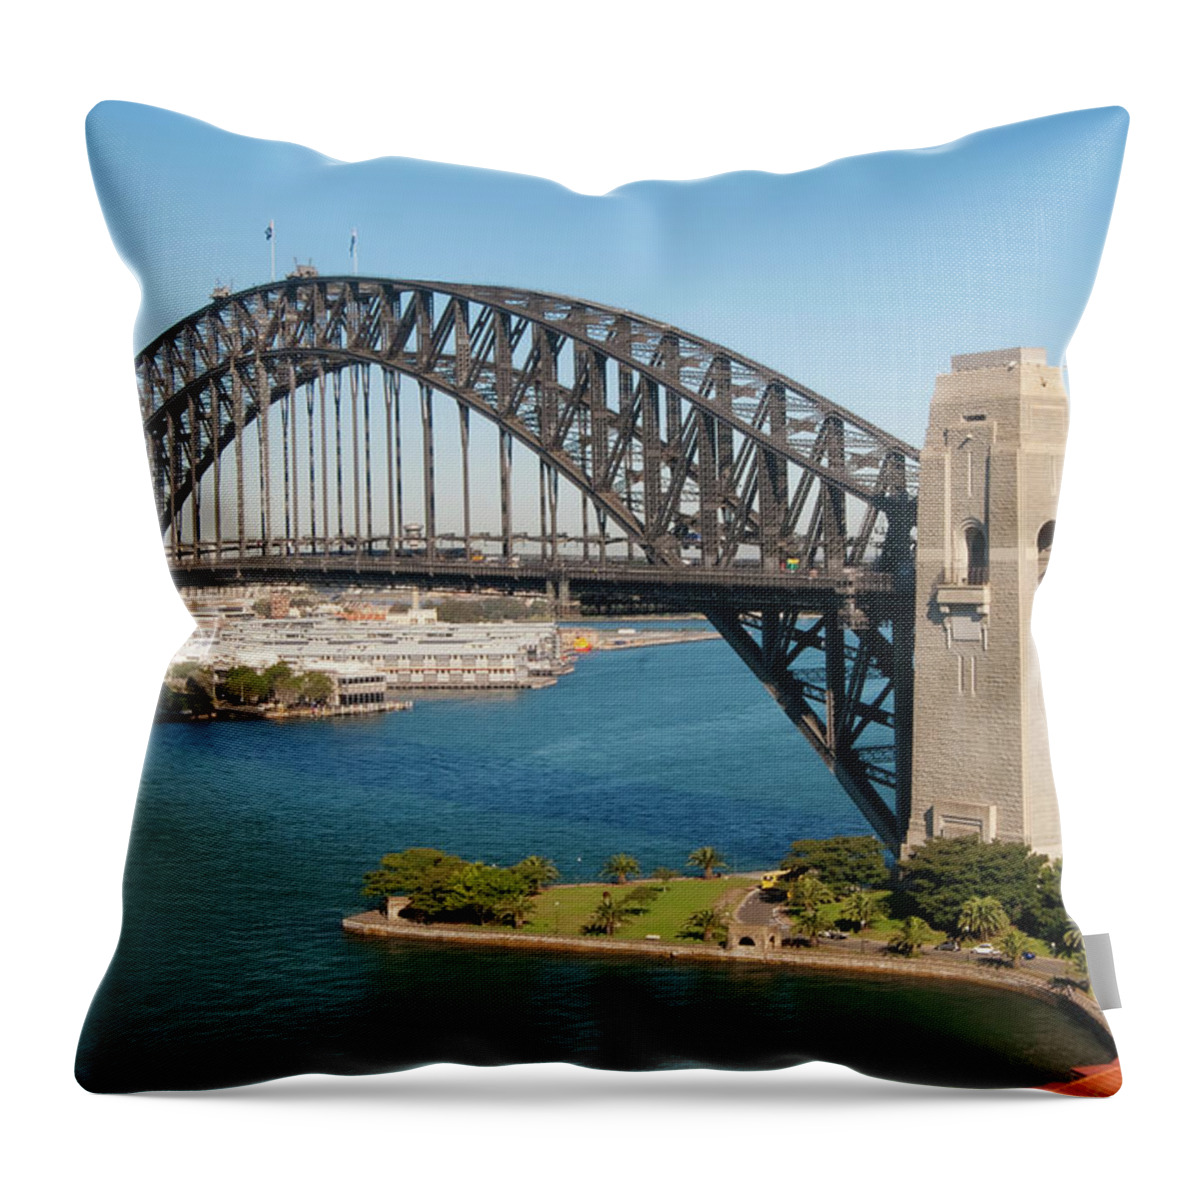 Tranquility Throw Pillow featuring the photograph Sydney Harbor Bridge by Kokkai Ng